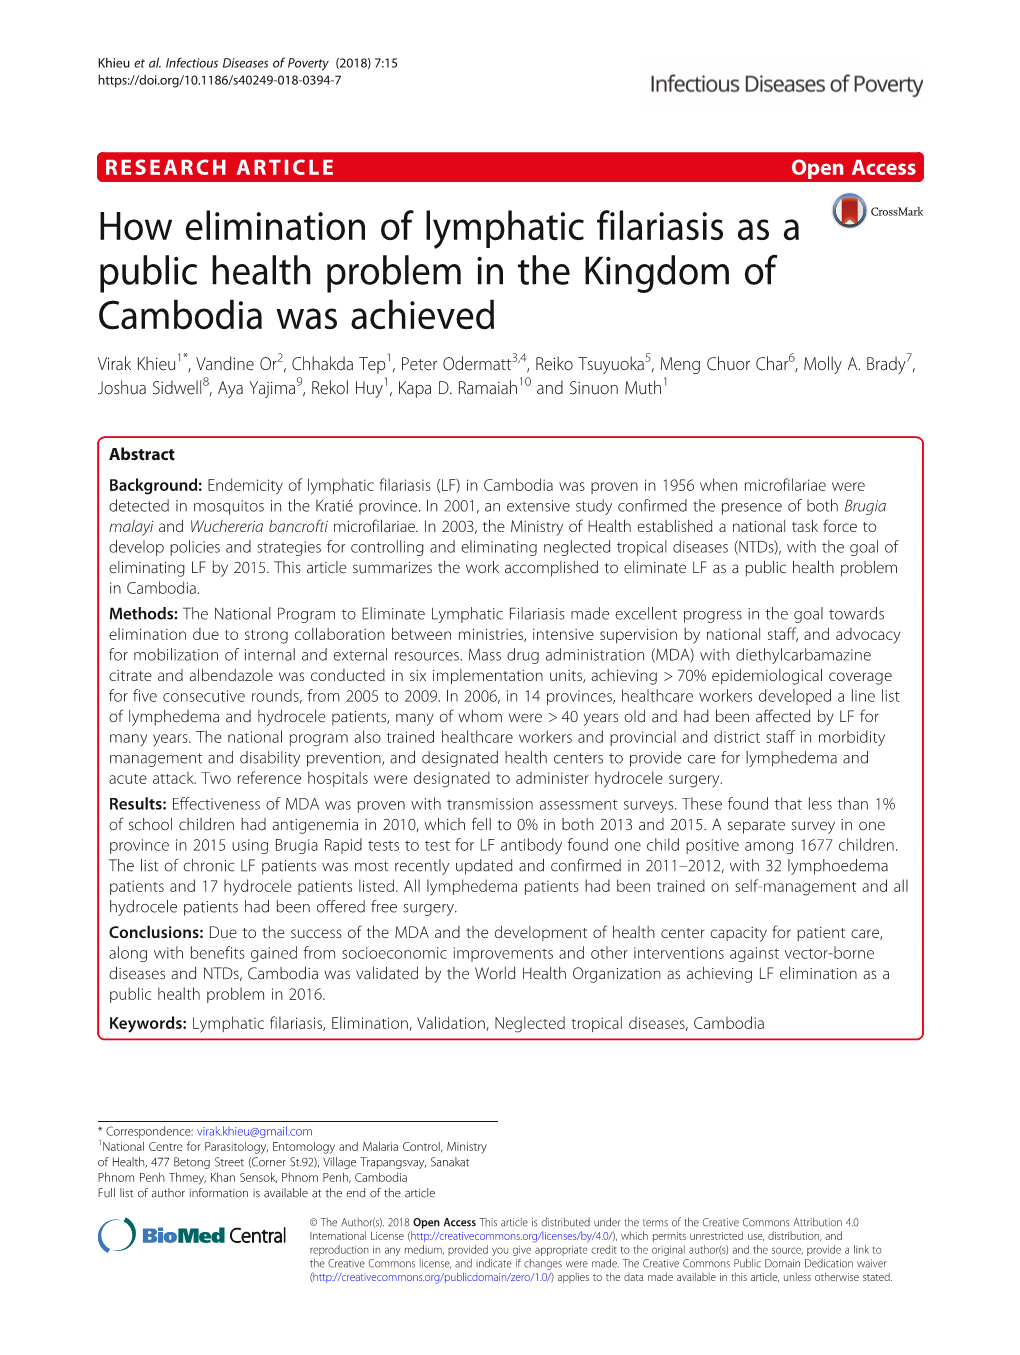 How Elimination of Lymphatic Filariasis As a Public Health Problem in The